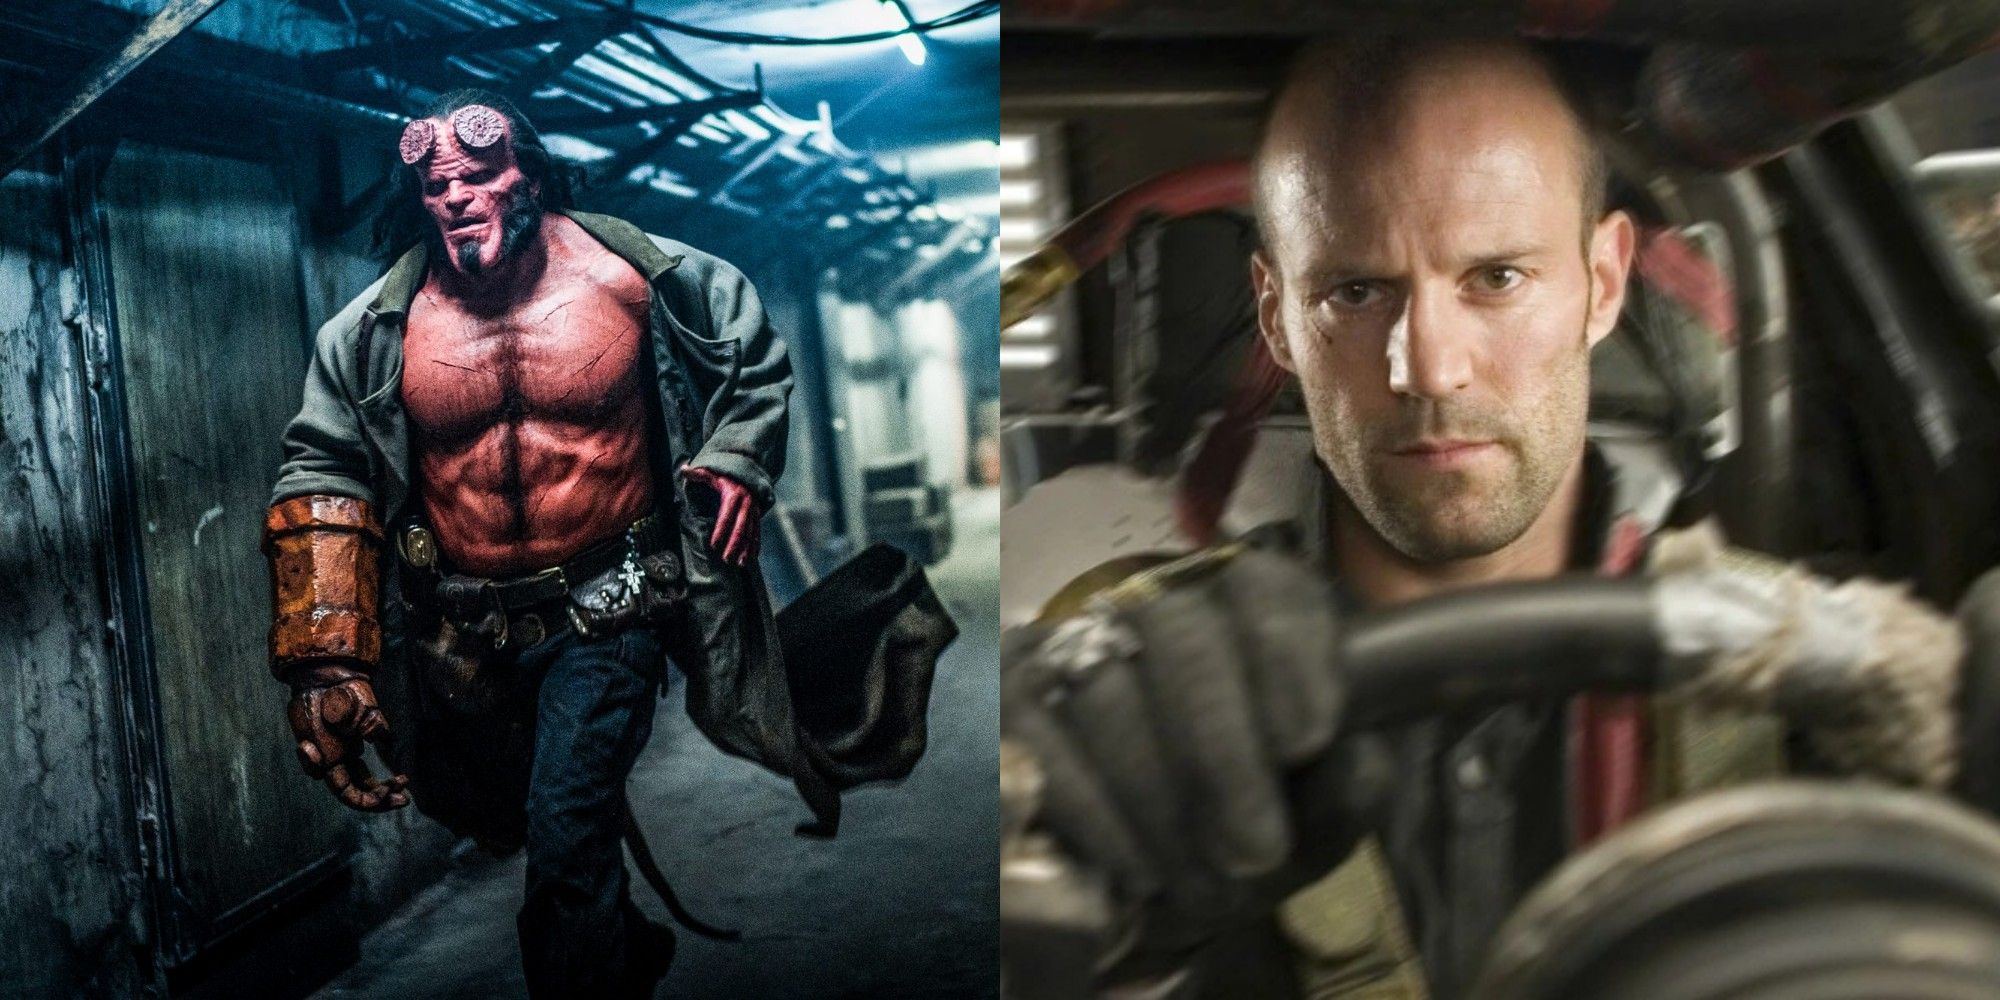 Hellboy running down a hall, Jason Statham driving in Death Race